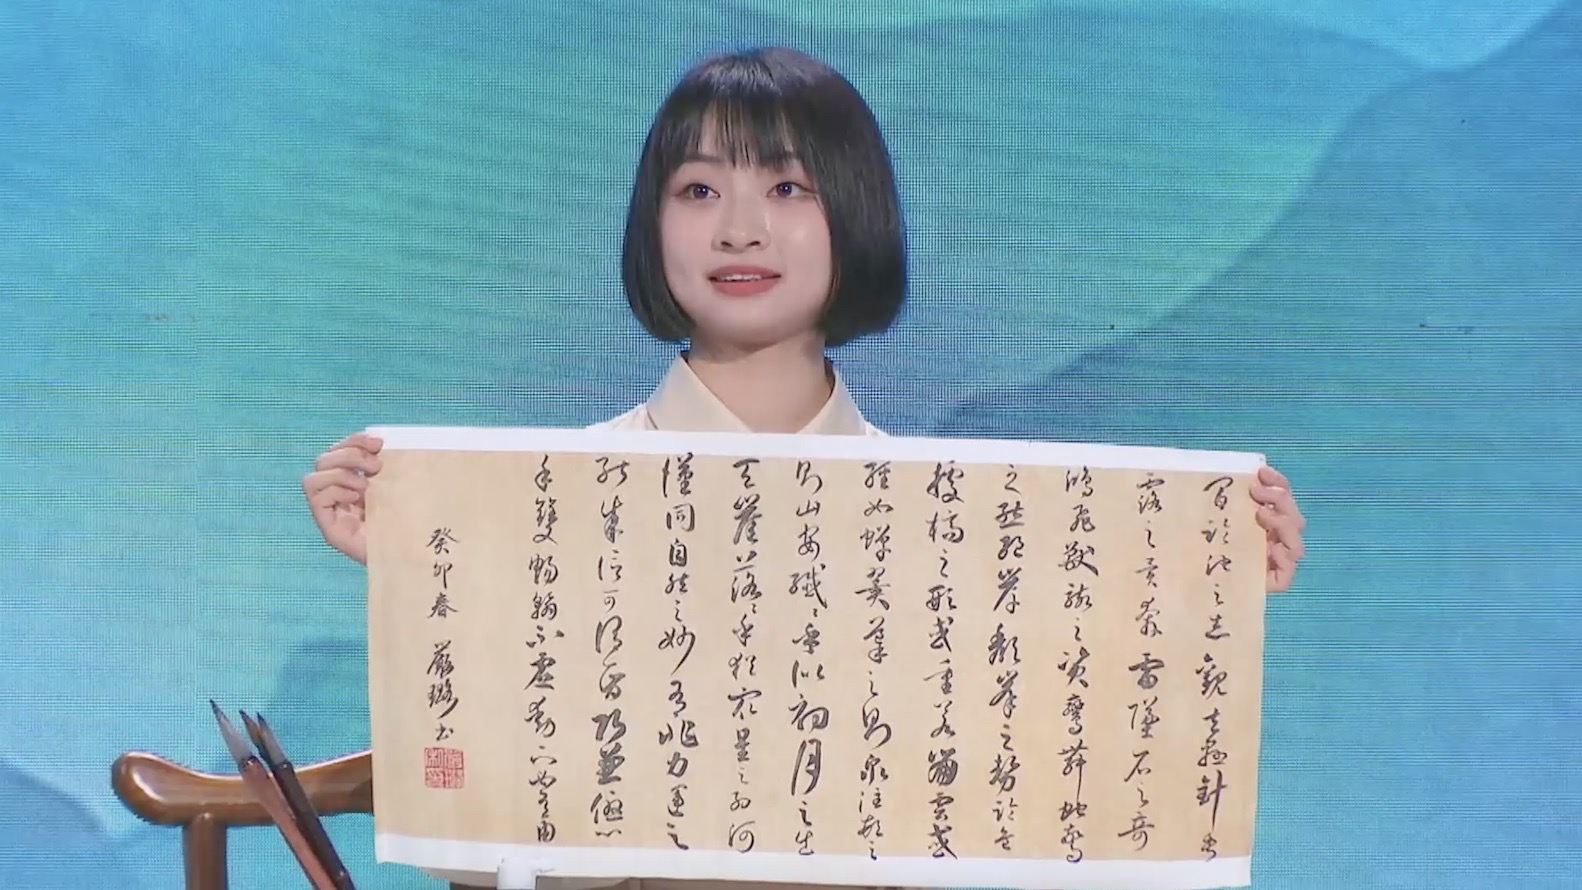 A calligraphy enthusiast showcases her copy of 